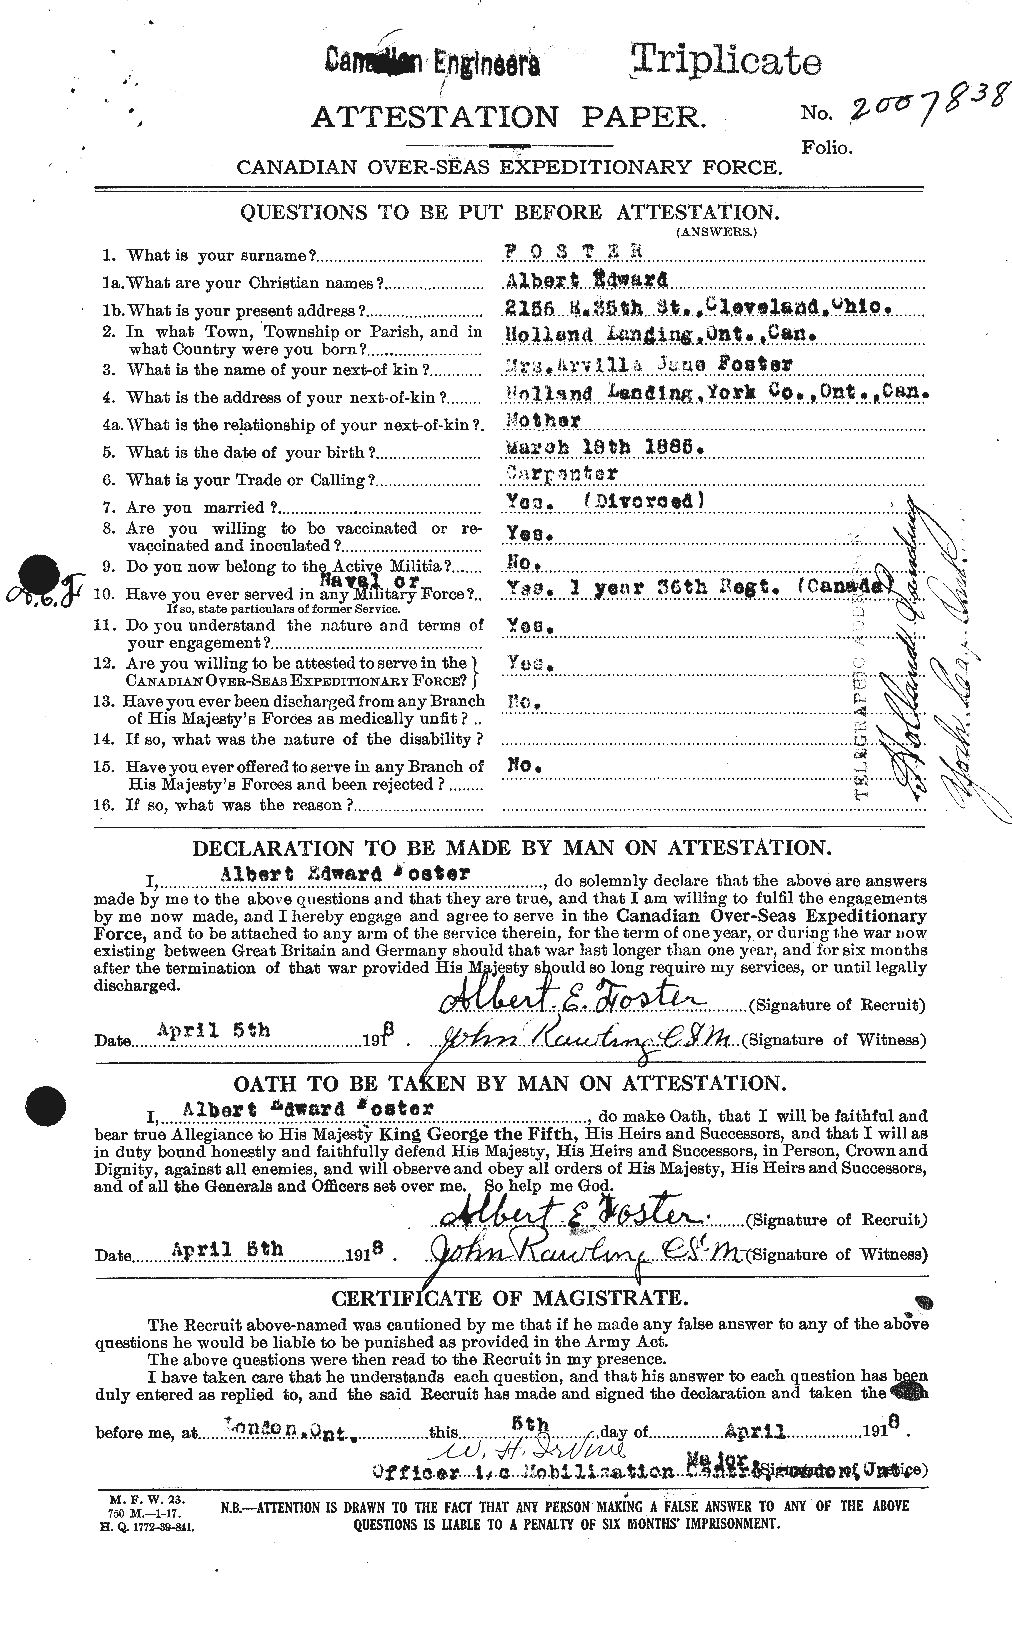 Personnel Records of the First World War - CEF 330436a